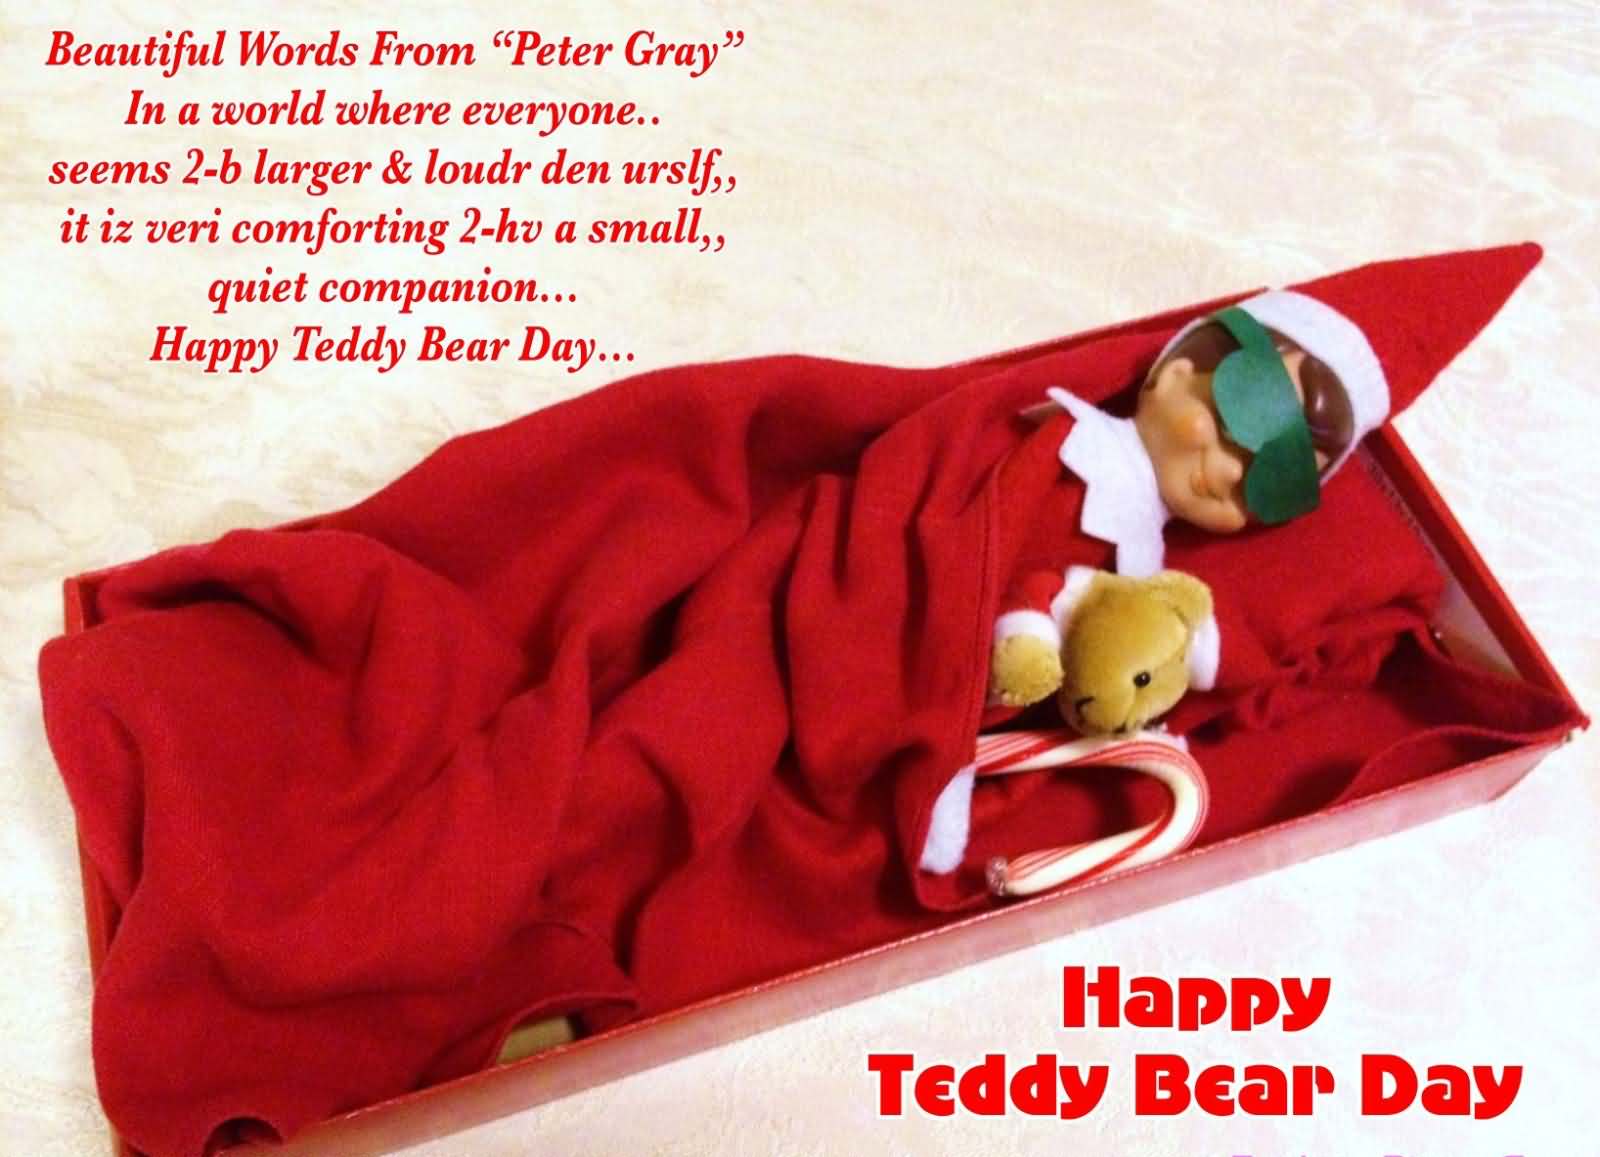 Happy teddy bear day beautiful words from peter gray